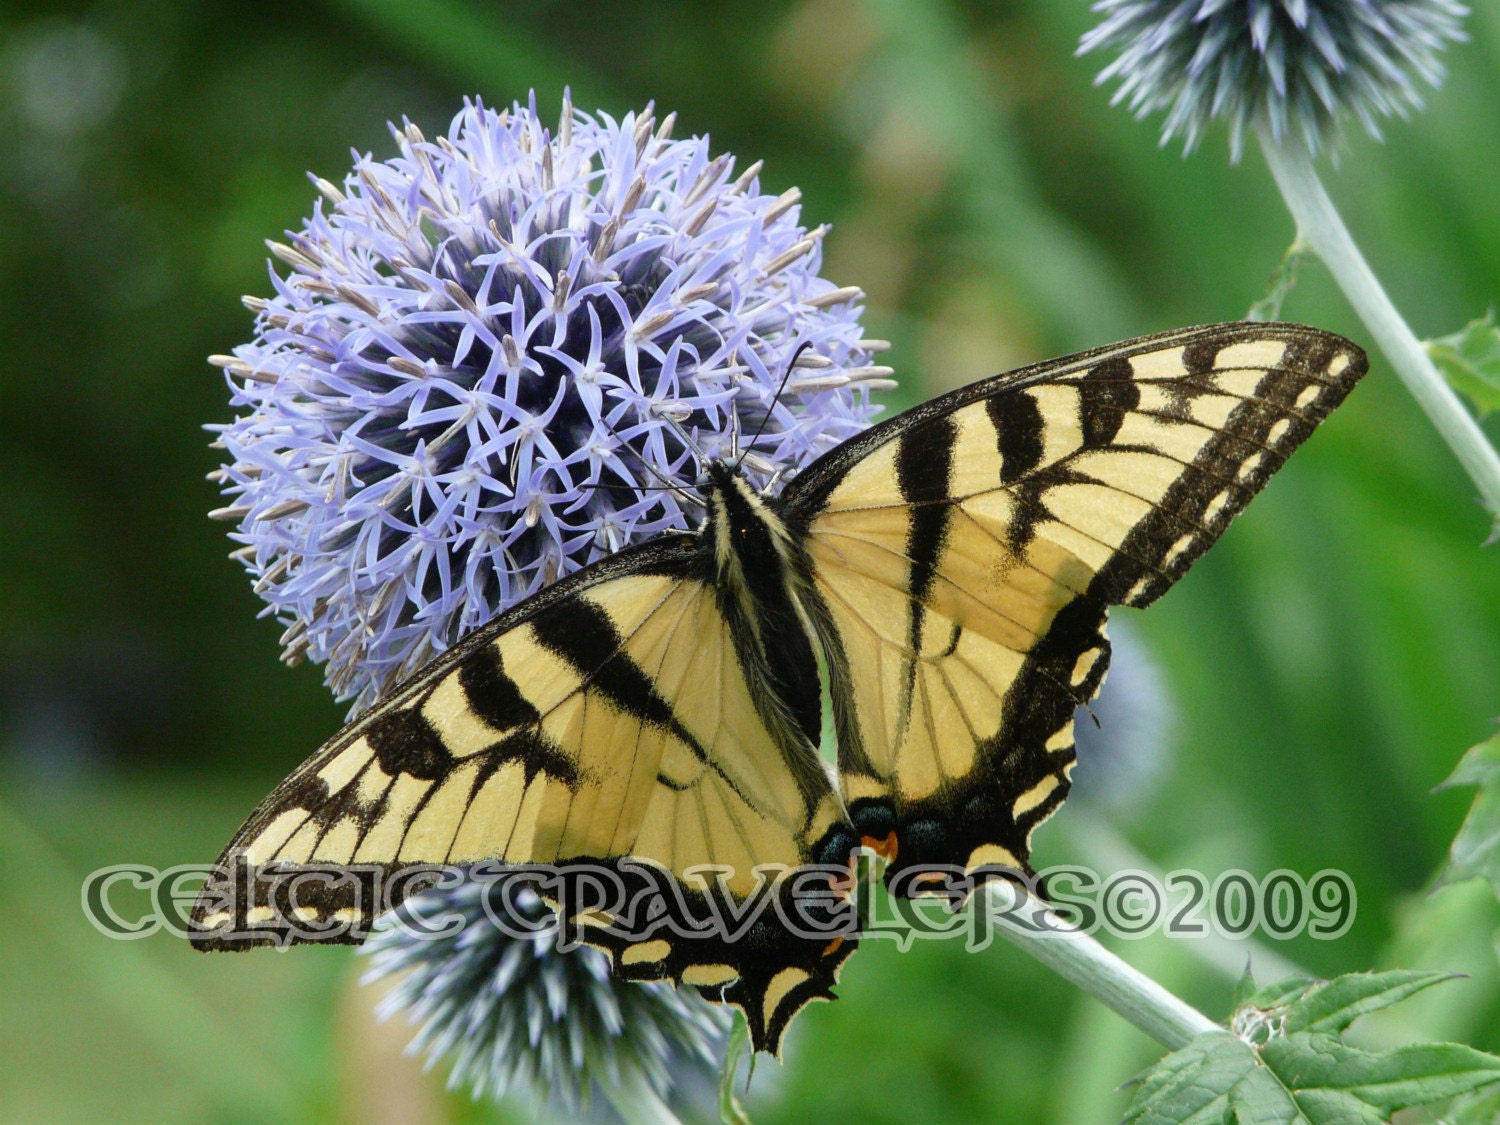 Swallowtail Butterfly on Globe Thistle 5 x7 Art Photograph Note Card with envelope - celtictravelers